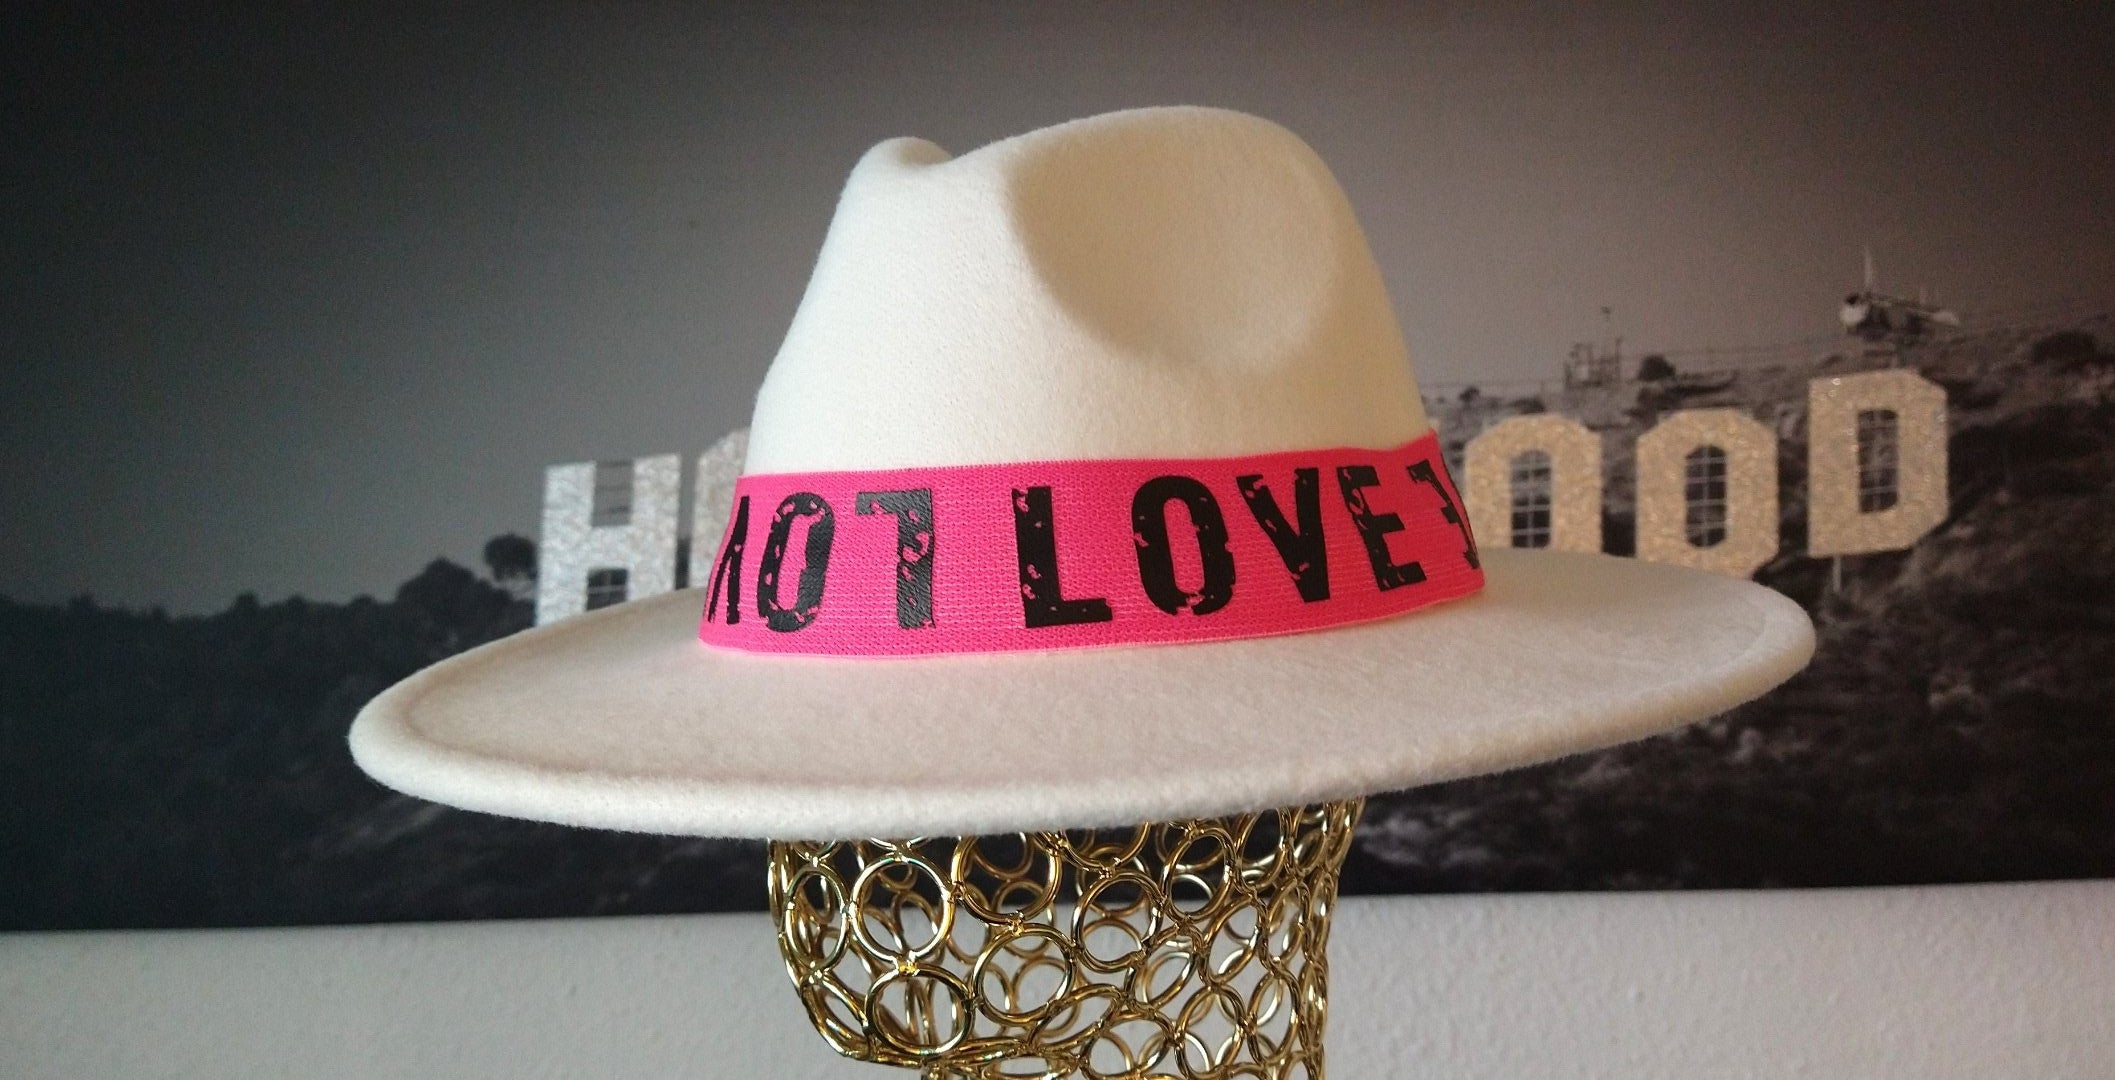 Hat Accessories - handmade removable bands for brims